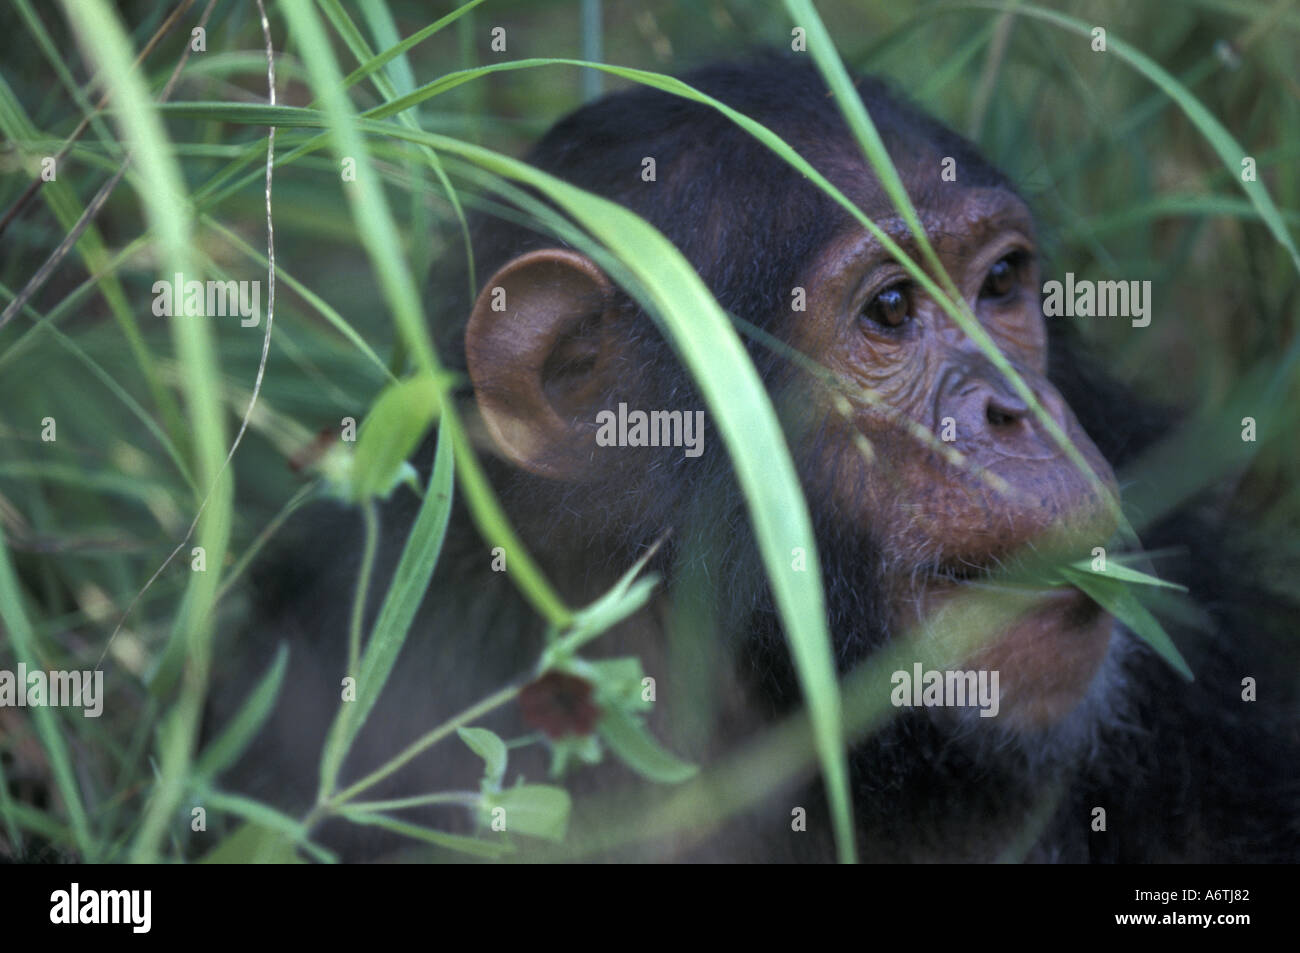 Africa, East Africa, Tanzania. Gombe National Park. Female Chimpanzee Gaia rolls the leaves of a plant. Stock Photo